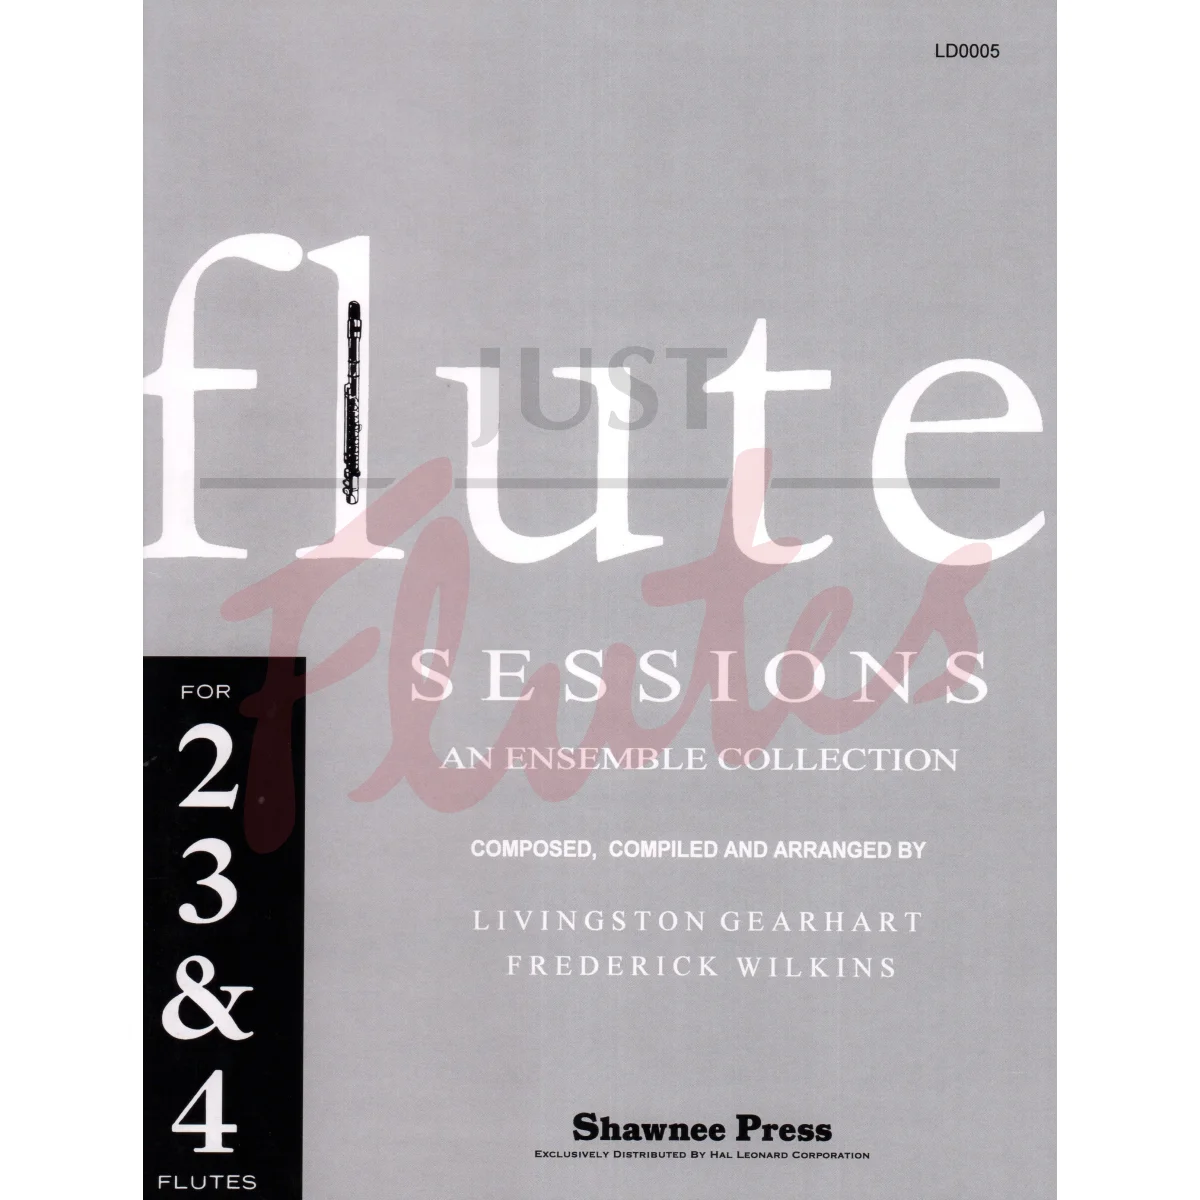 Flute Sessions